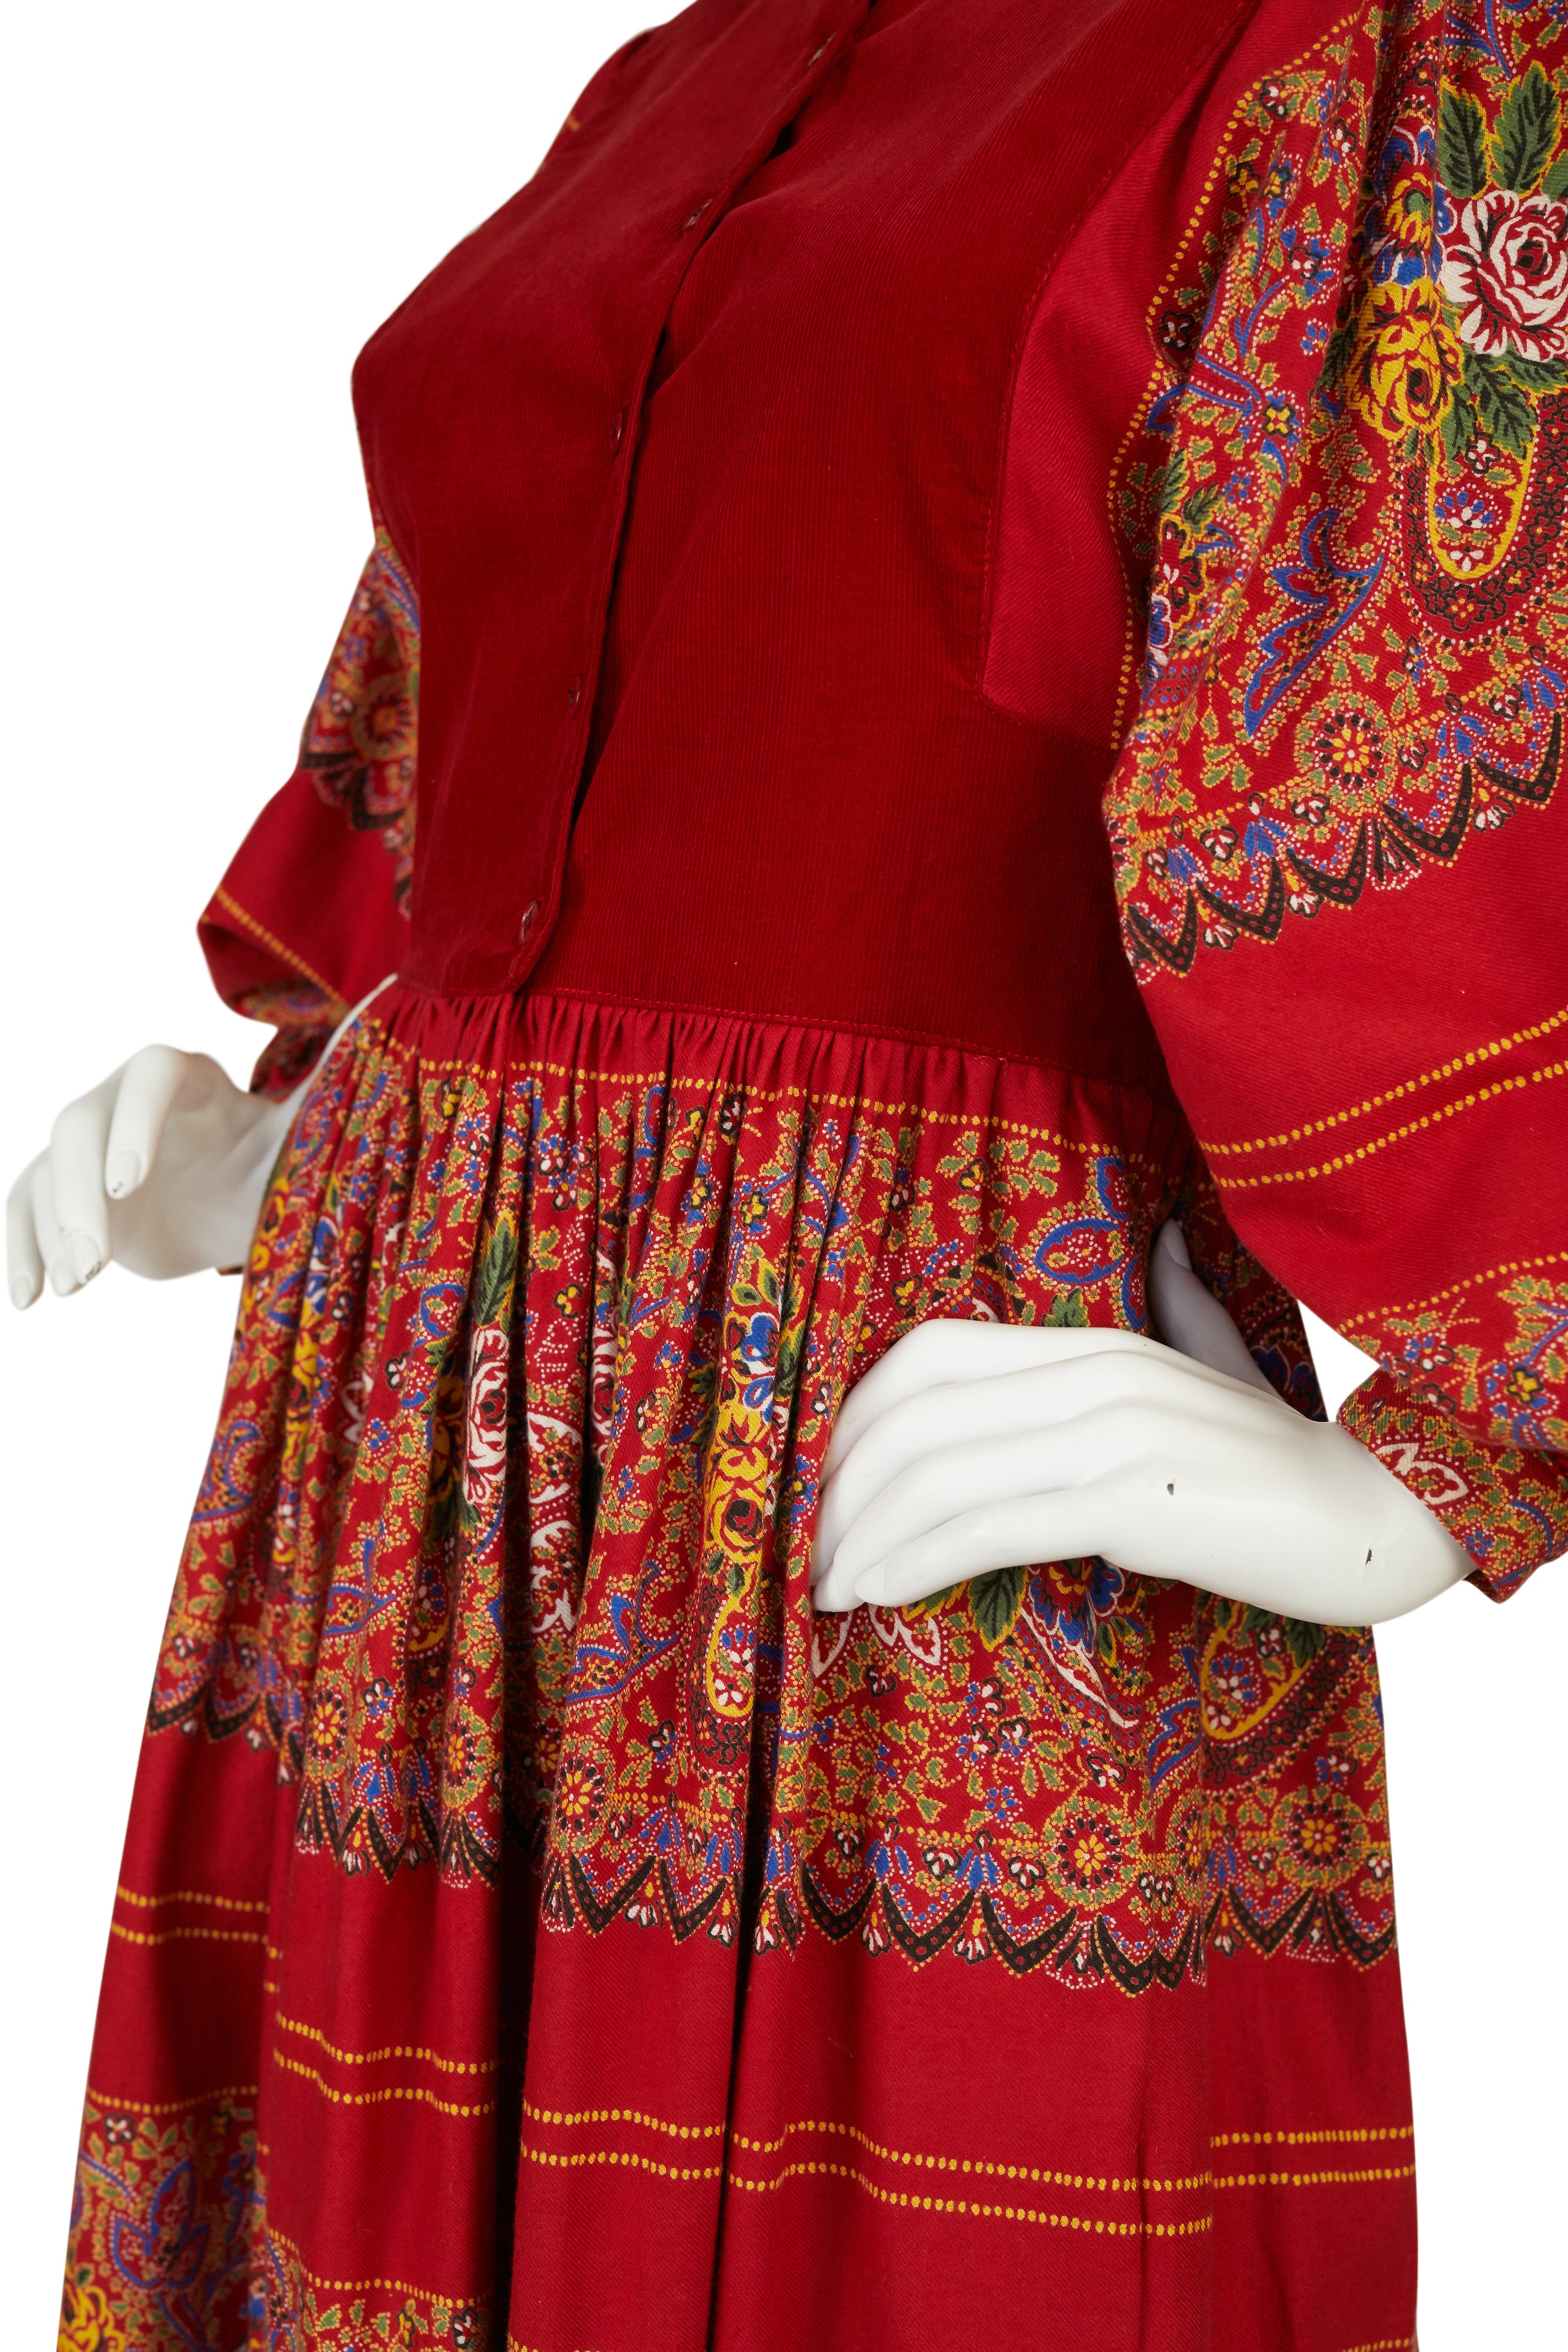 1970s Red Floral and Paisley Cotton Poet Sleeve Dress